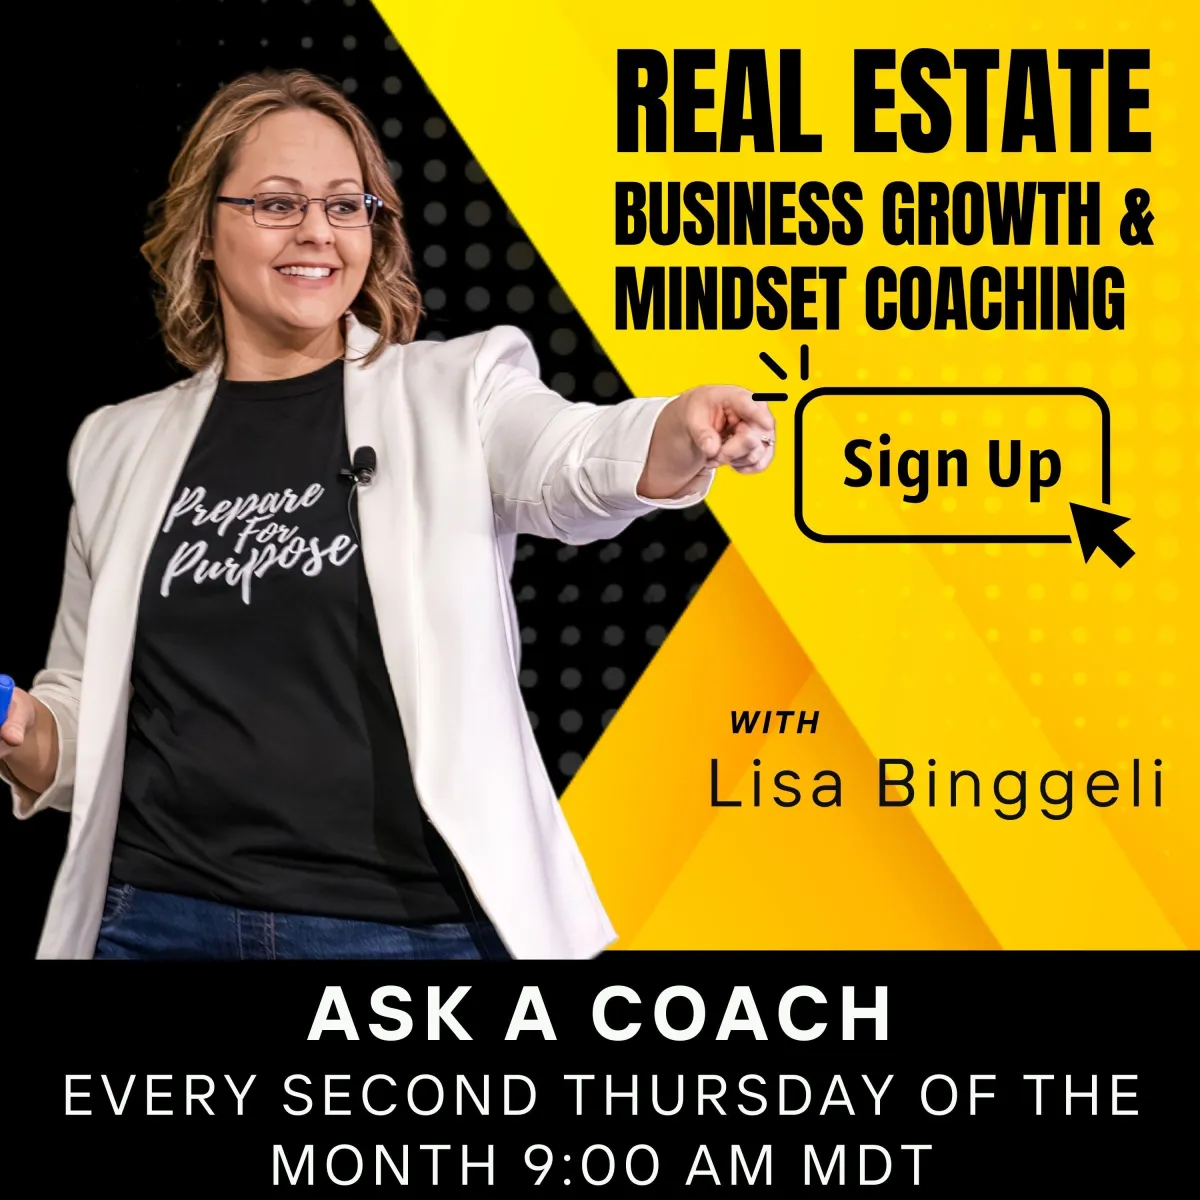 Real Estate Business Growth & Mindset Coaching:ASK A COACH Every Thursday 9:00 am MDT